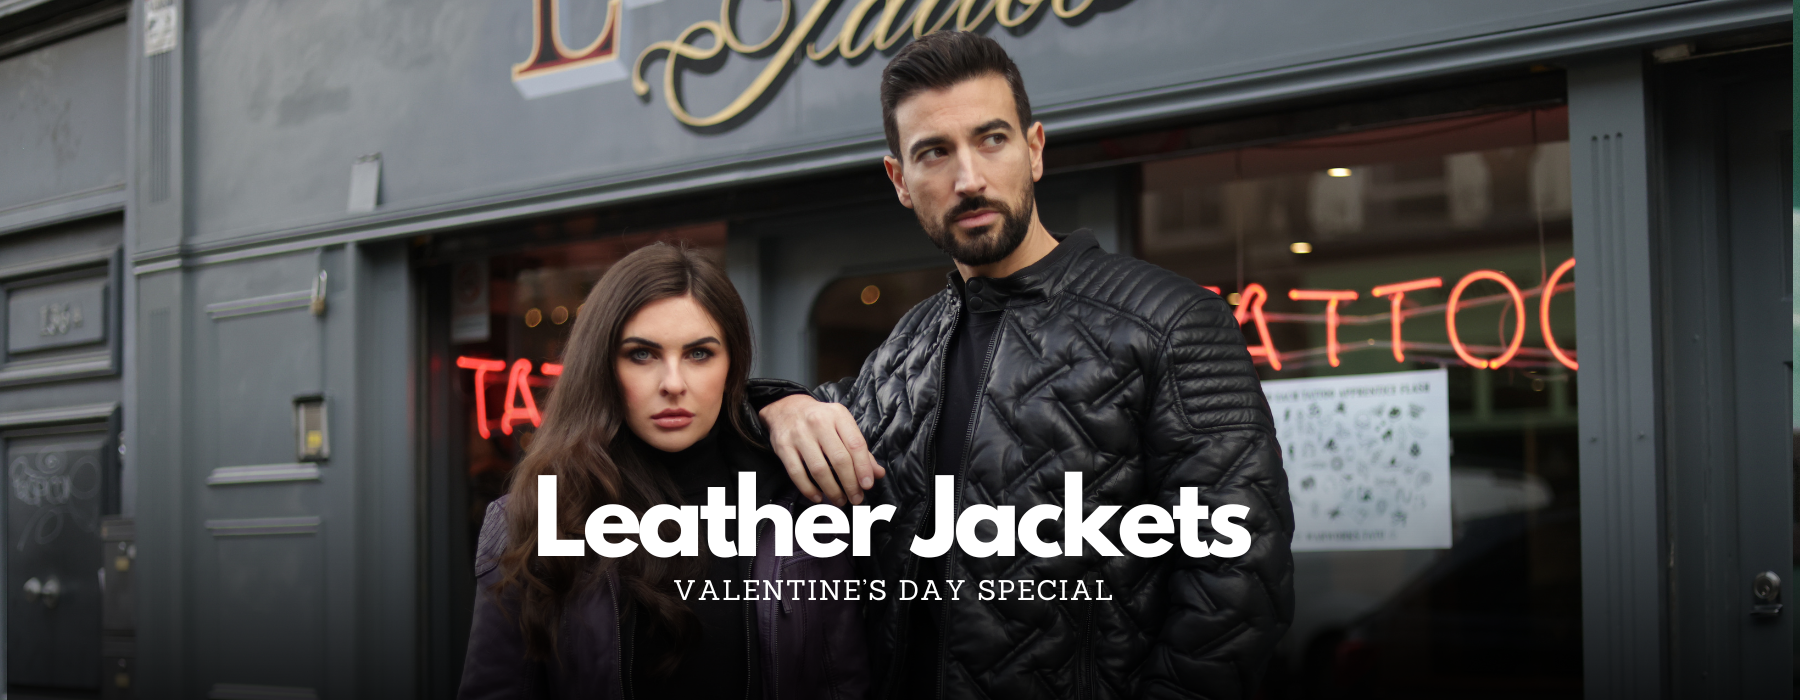 Love in Leather Jackets: Styling Tips for a Romantic Valentine's Day Date - Upperclass Fashions 